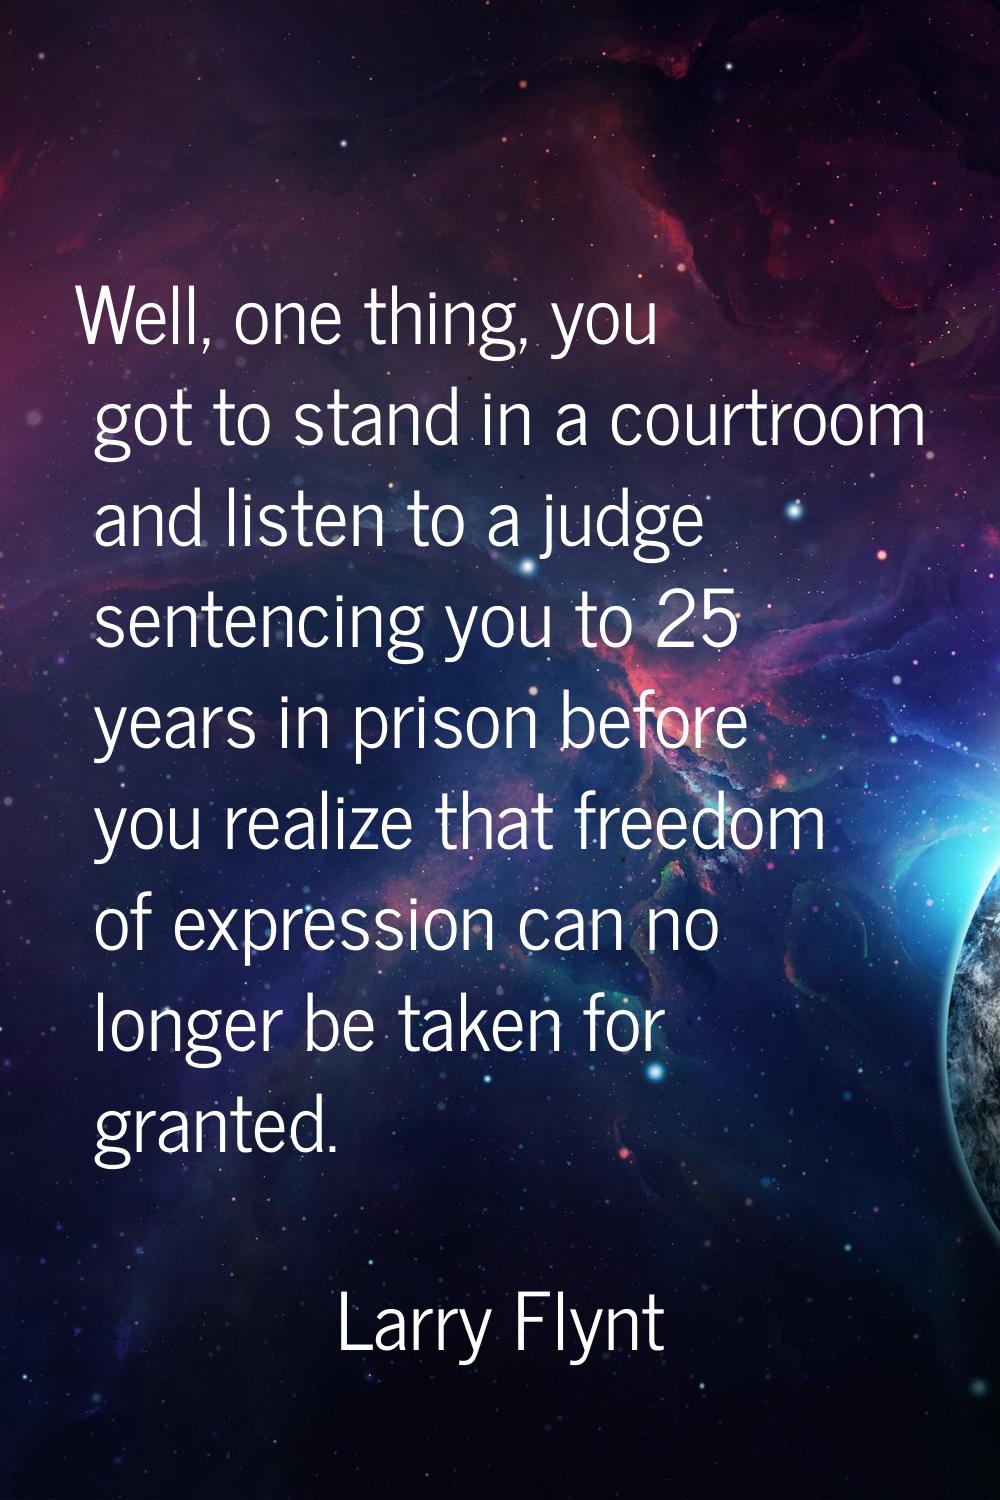 Well, one thing, you got to stand in a courtroom and listen to a judge sentencing you to 25 years i